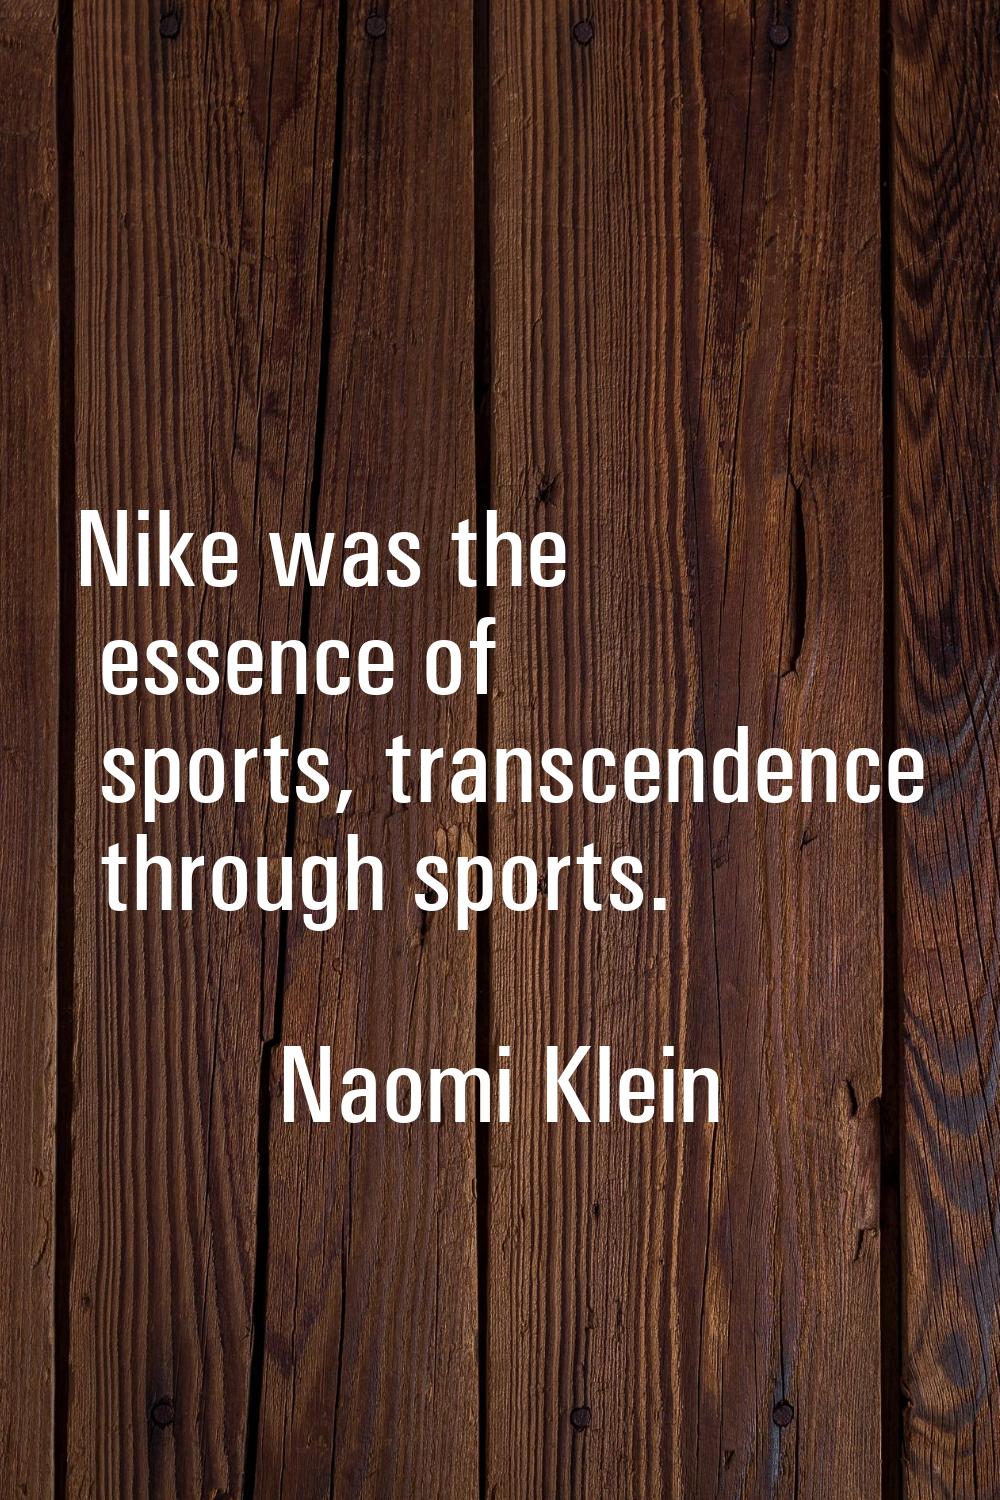 Nike was the essence of sports, transcendence through sports.